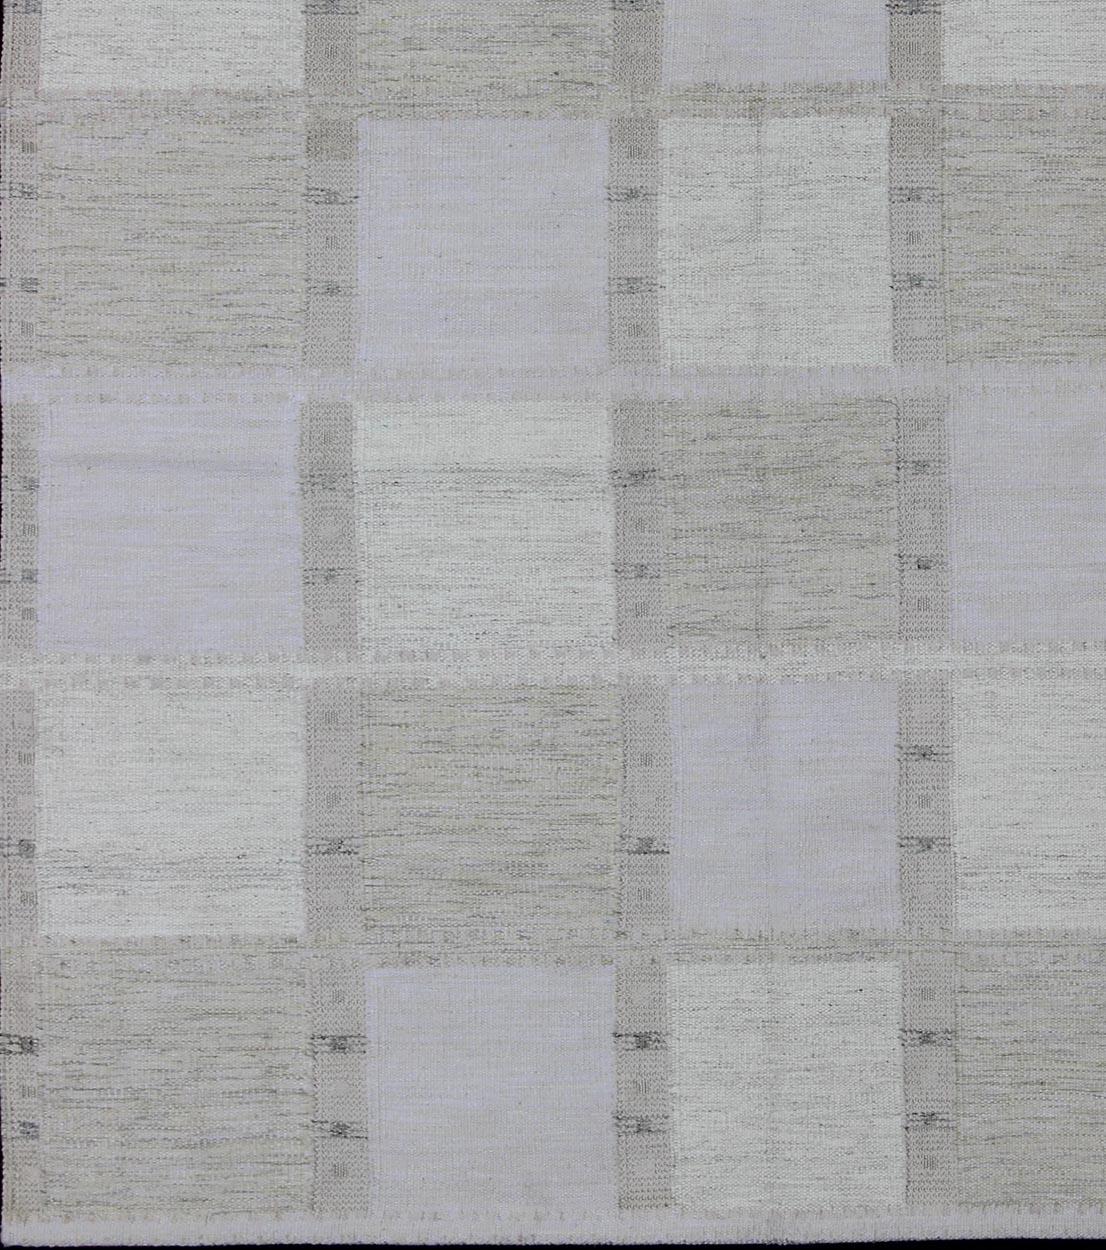 Gray checkerboard design modern Scandinavian flat-weave rug, rug RJK-16361-SHB-022-11, country of origin / type: India / Scandinavian flat-weave.

This Scandinavian flat-weave style is inspired by the work of Swedish textile designers of the early